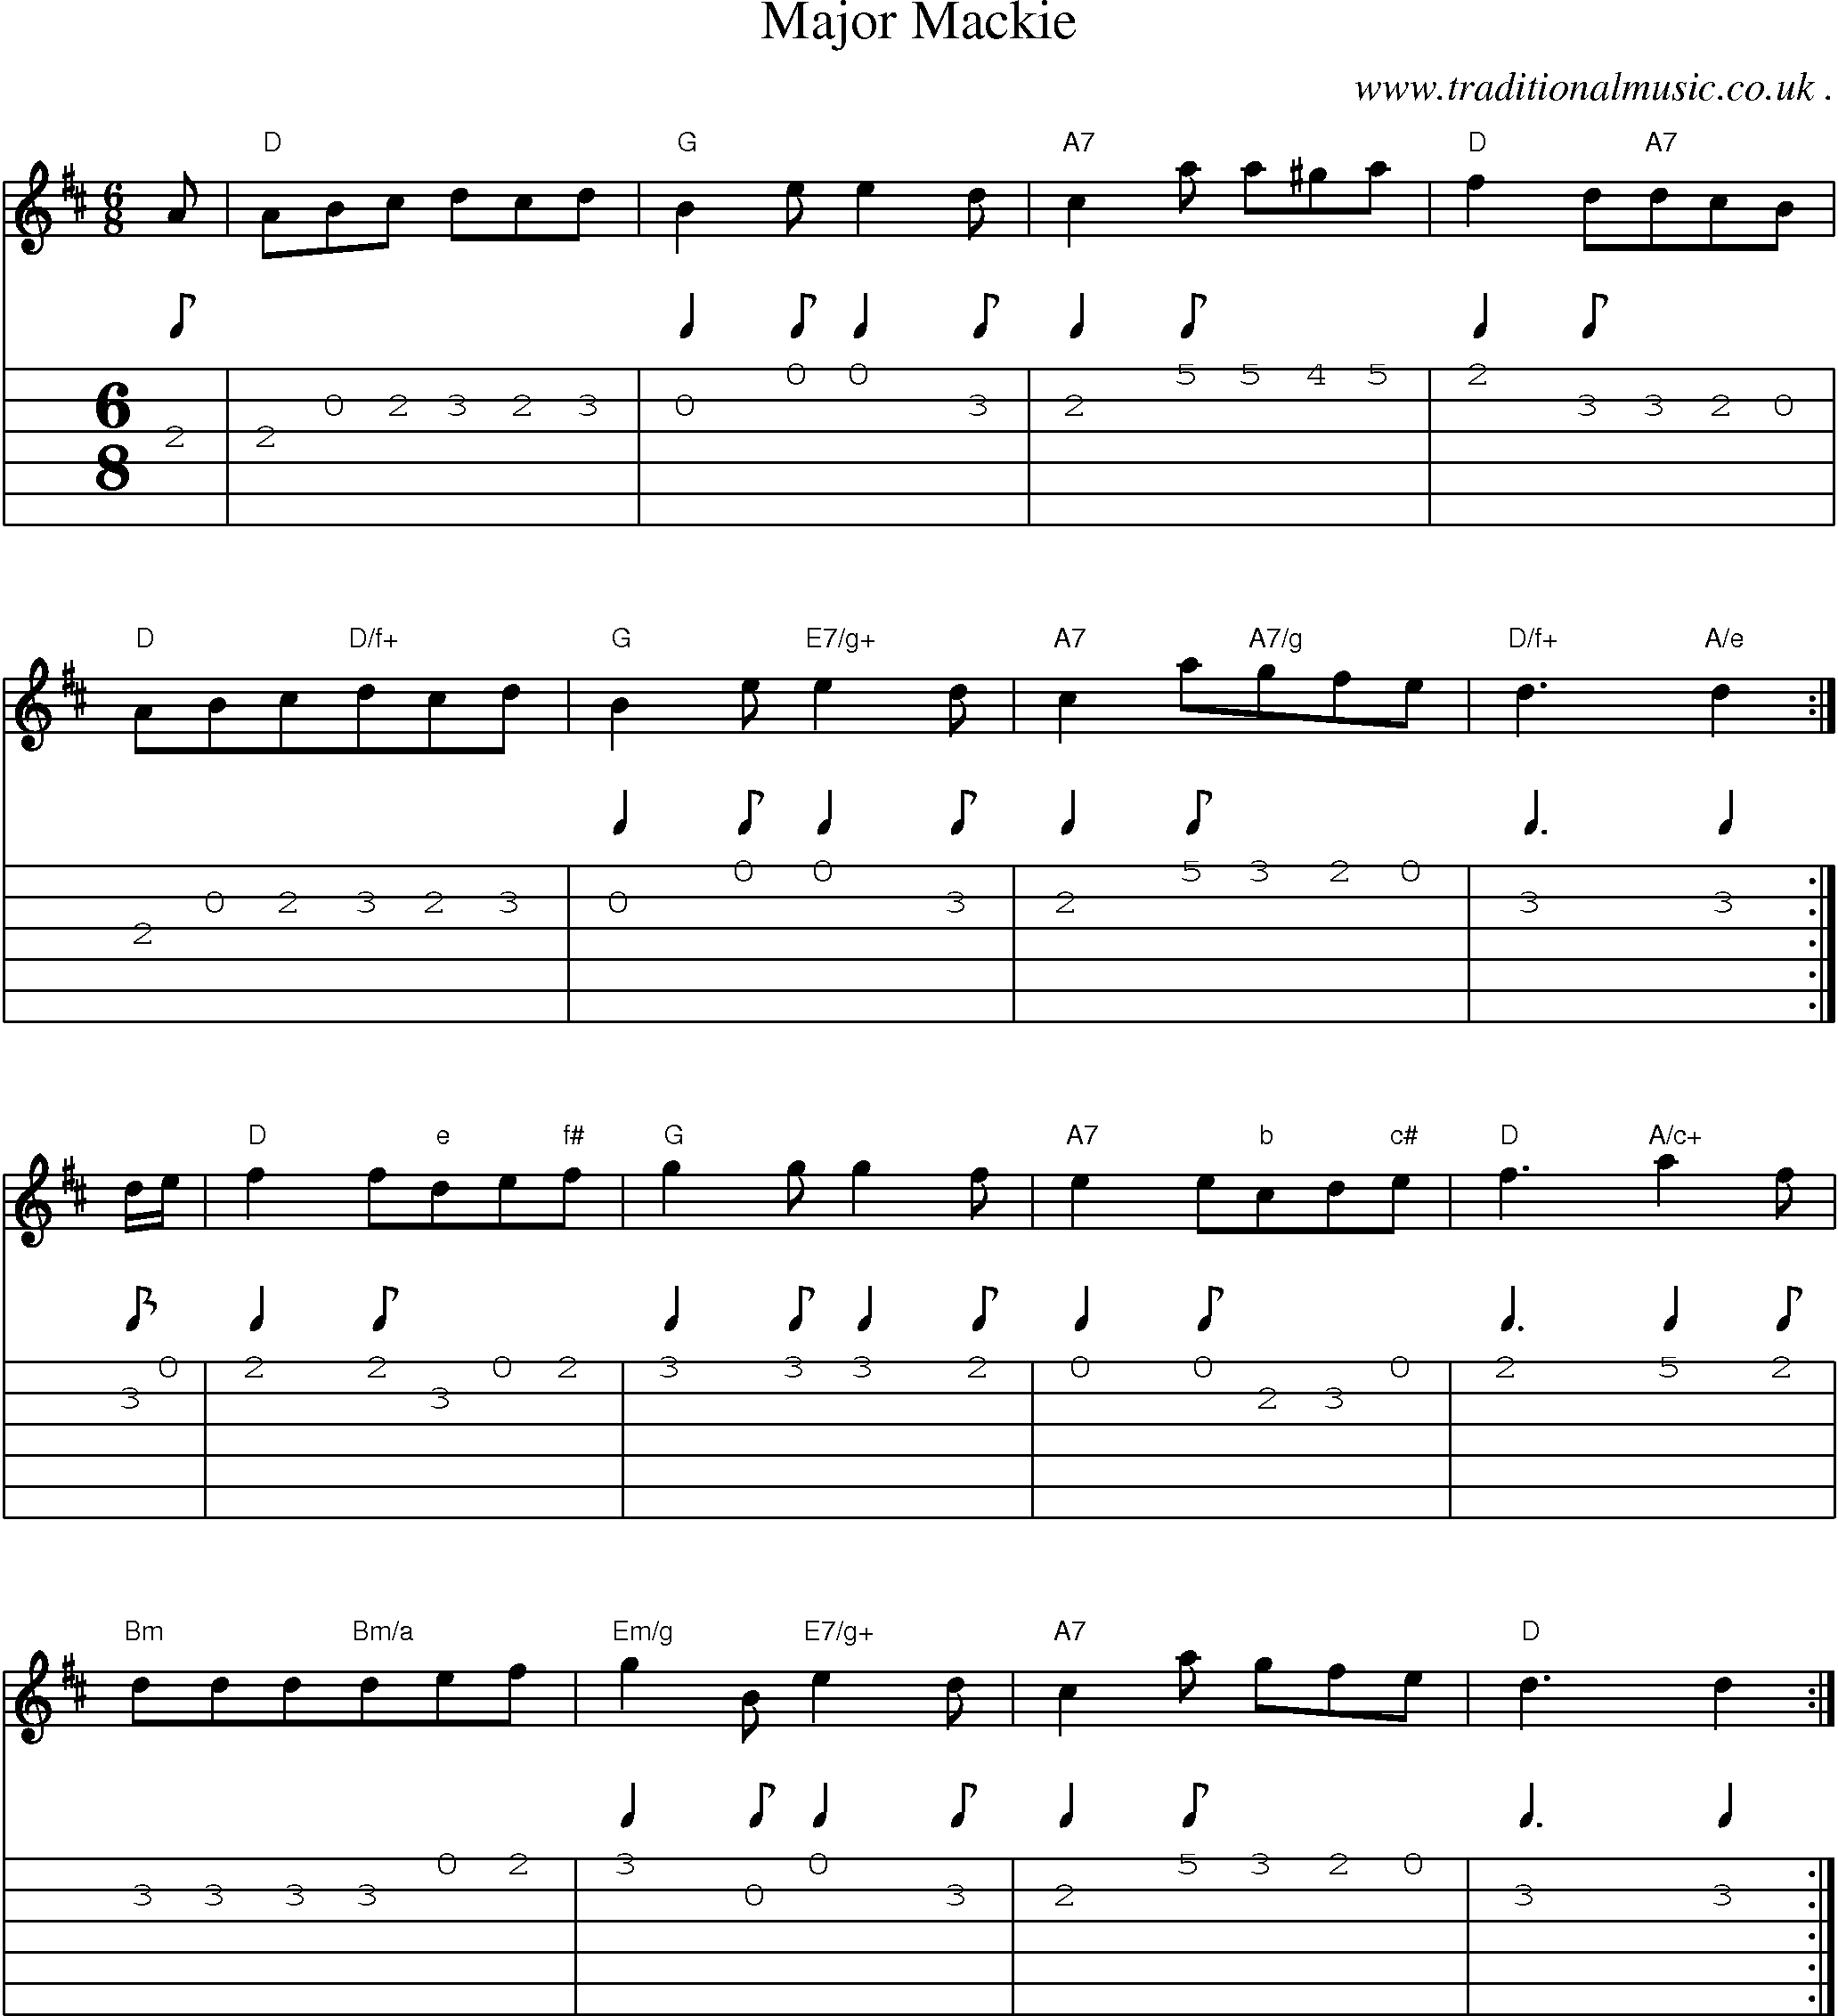 Sheet-Music and Guitar Tabs for Major Mackie